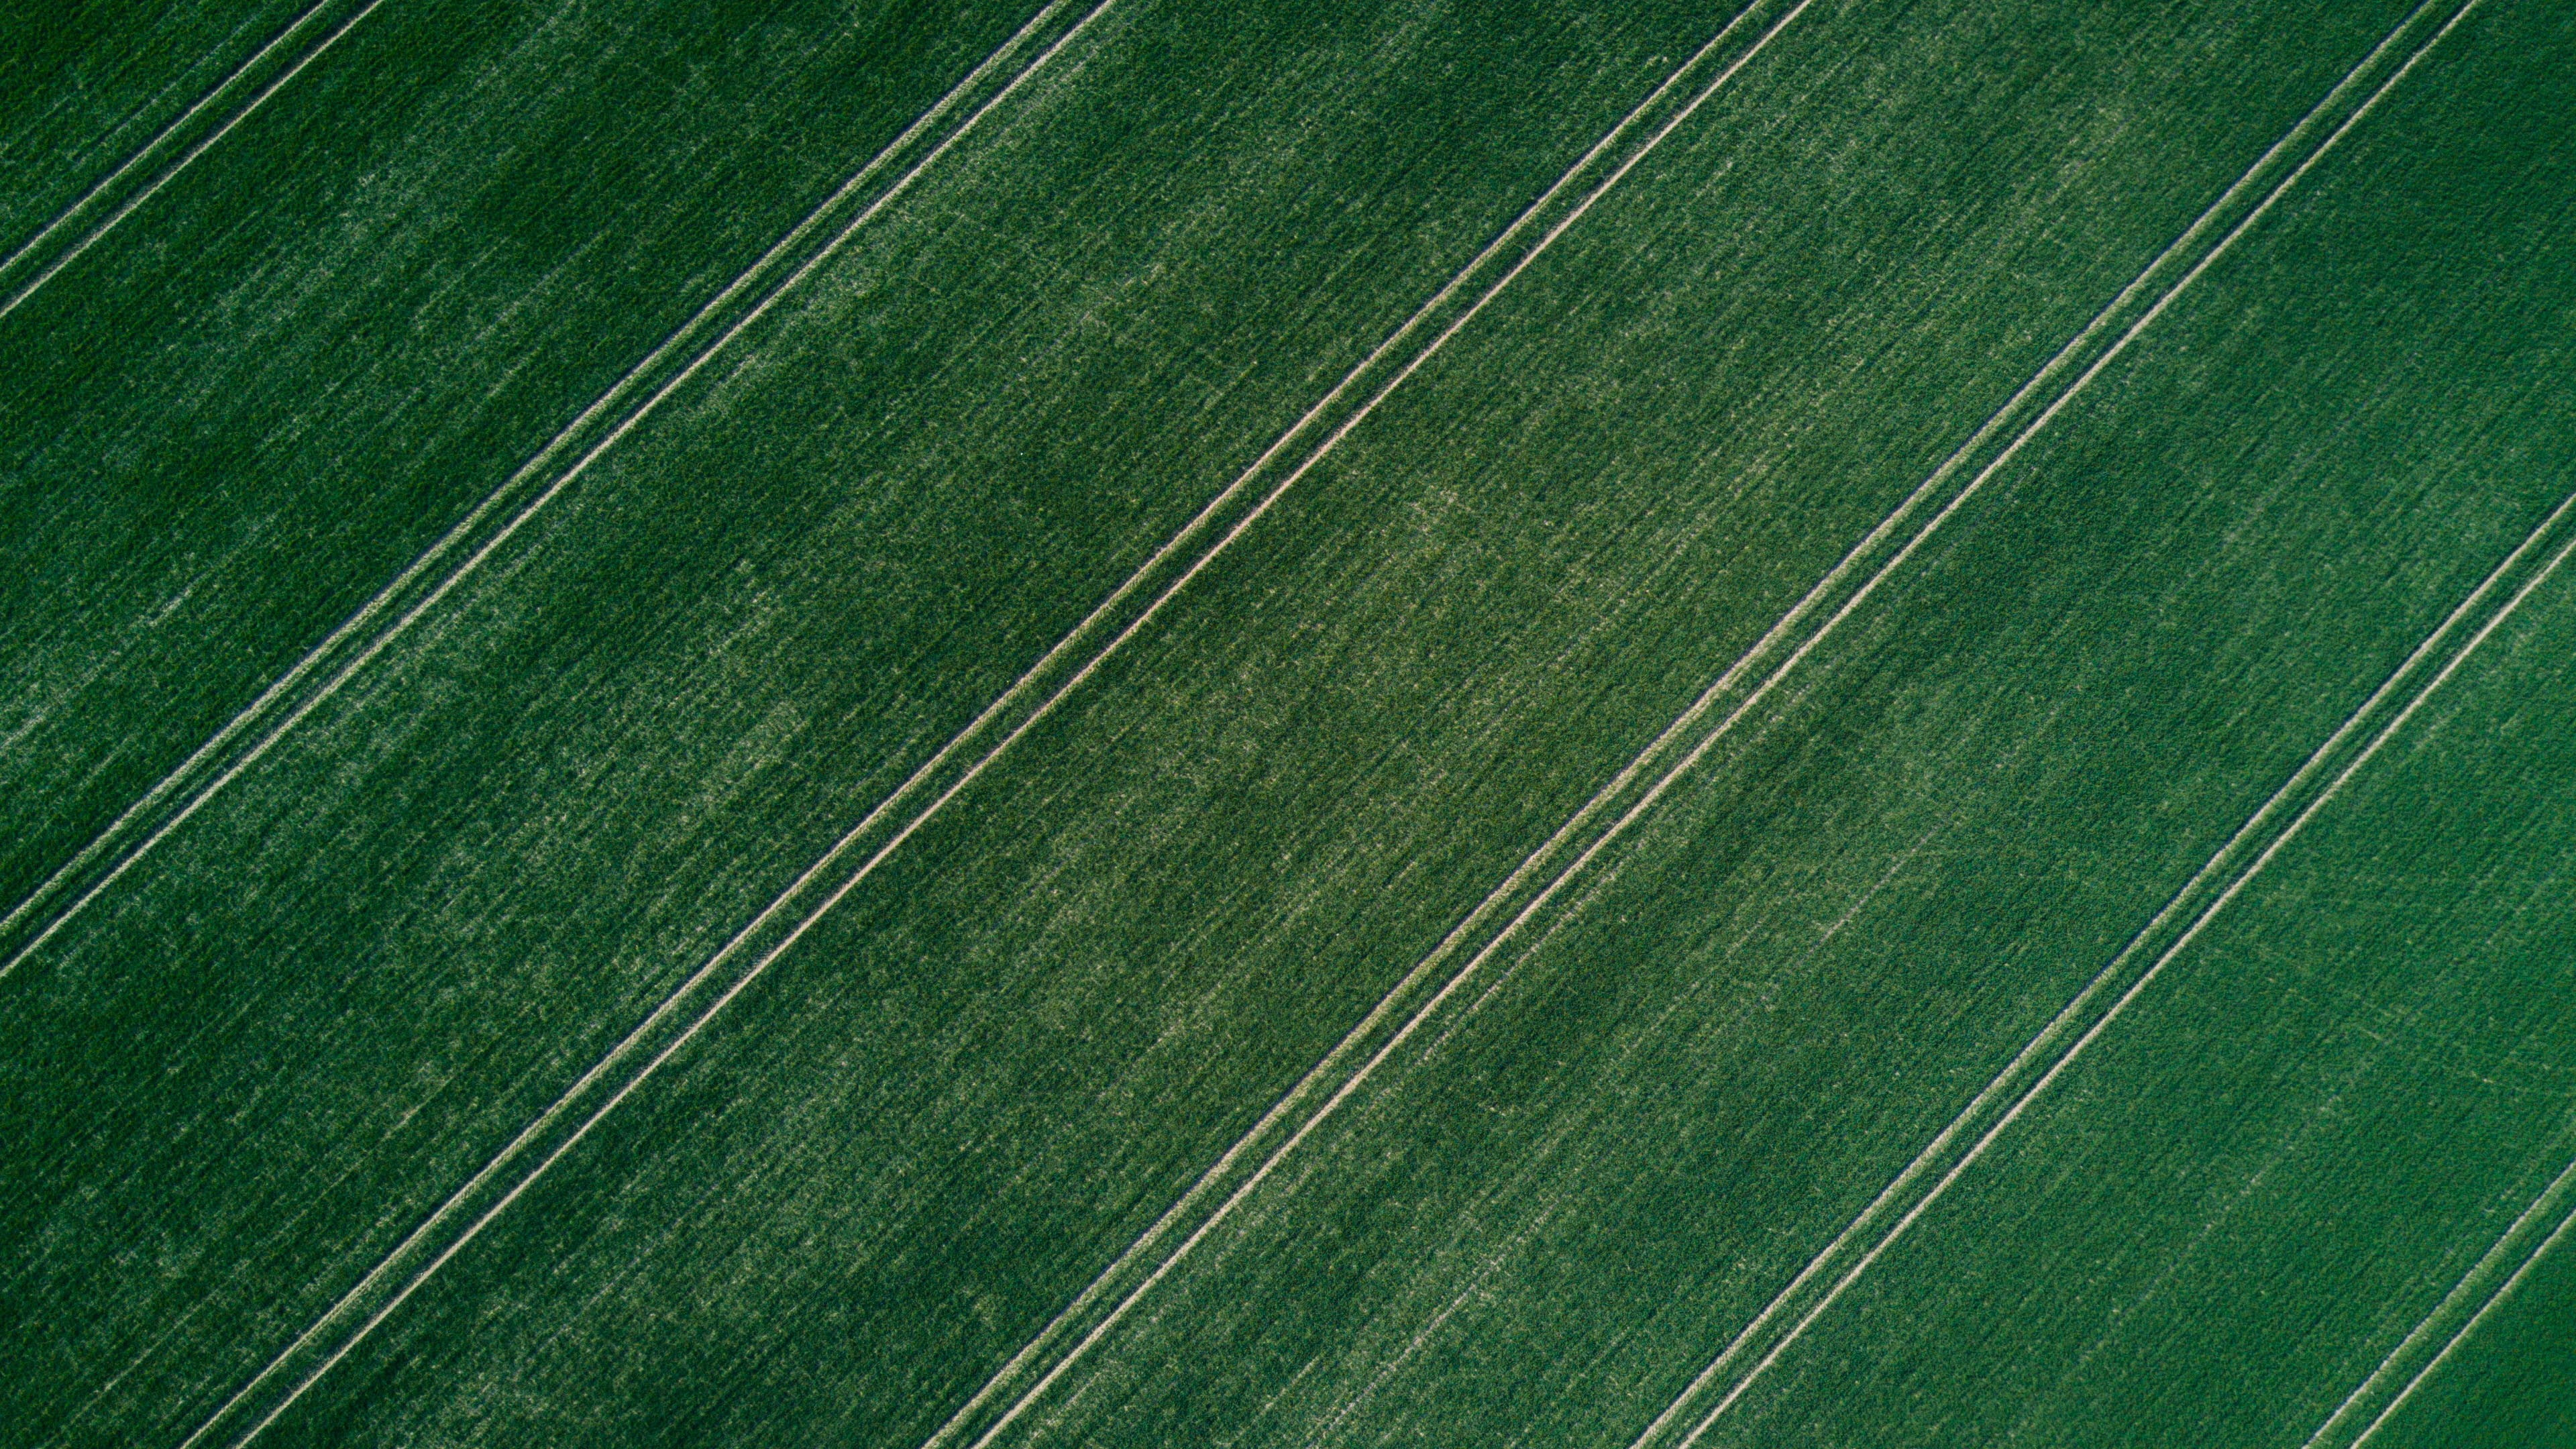 photography, grass, field, aerial view, landscape, symmetry